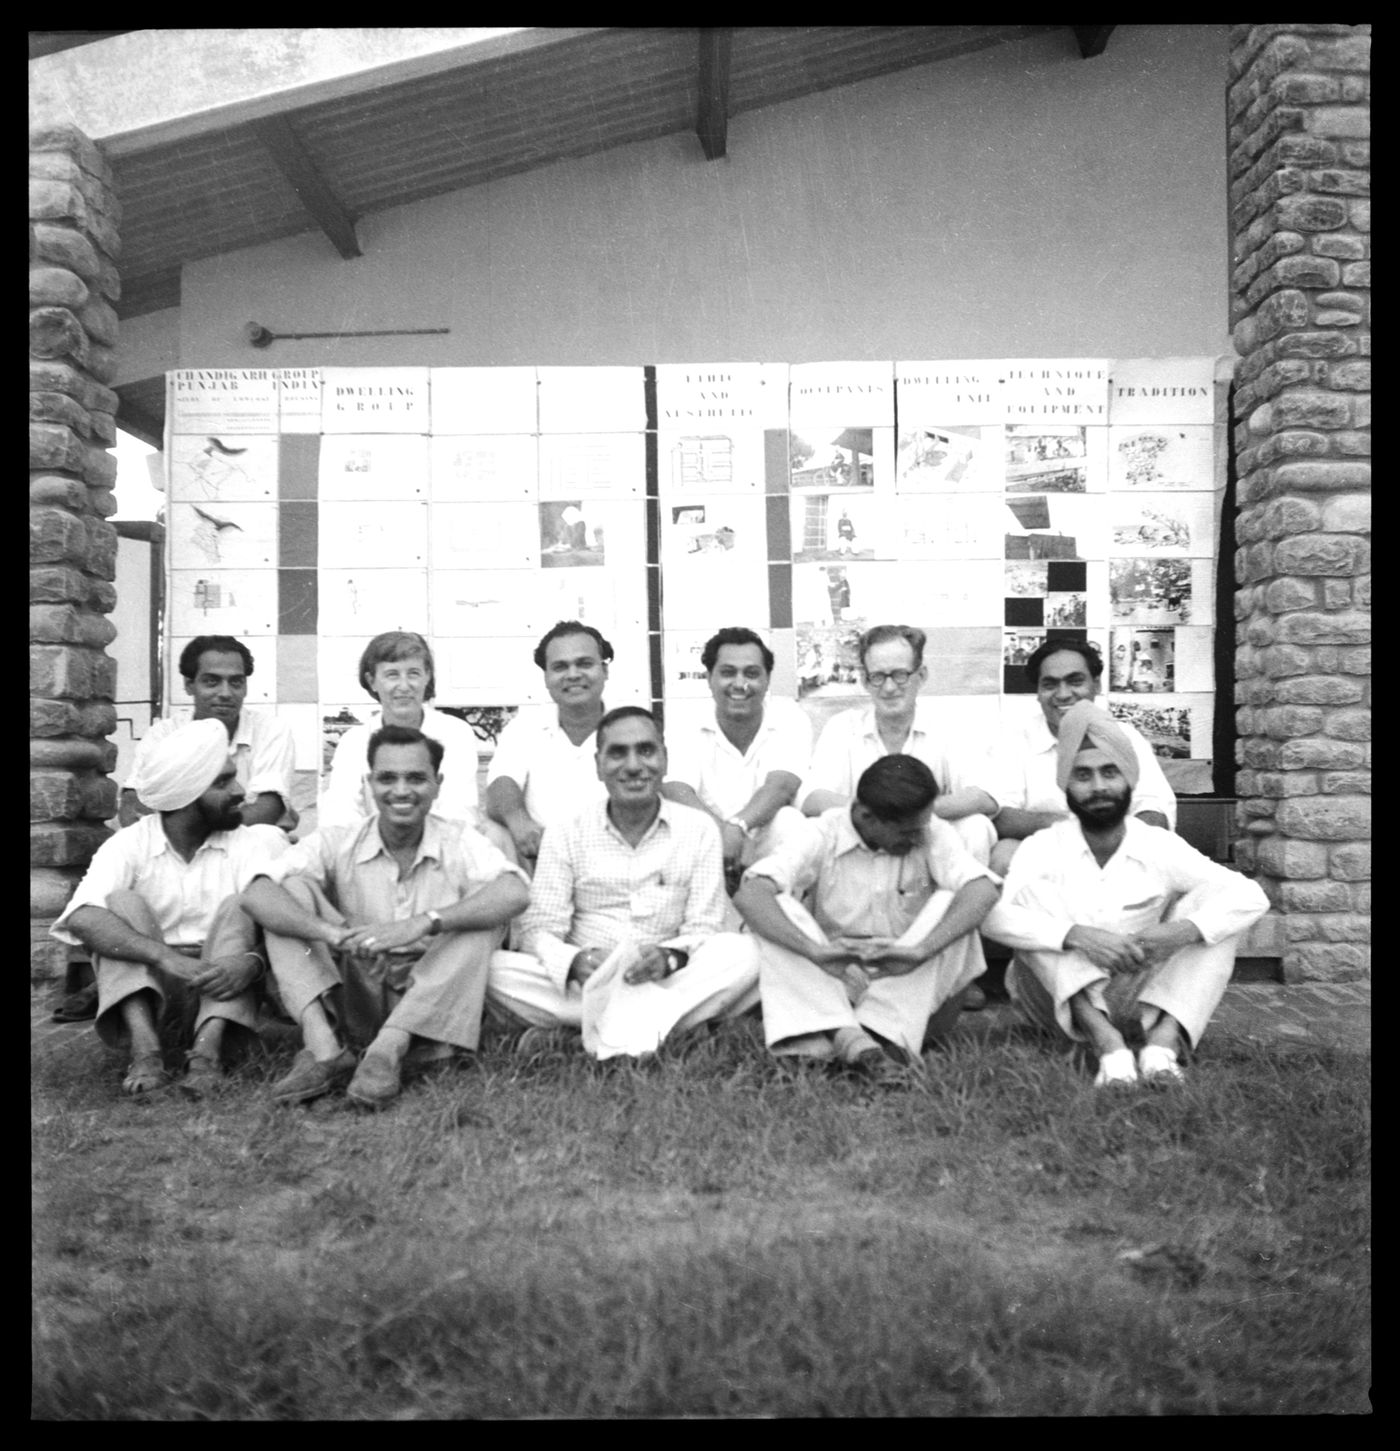 Architects' Office group portrait picturing Jane Drew (back row, second from left) and Maxwell Fry (back row, second from right) in front of the Chandigarh grid, at the Architect's Office, Sector 19, Chandigarh, India